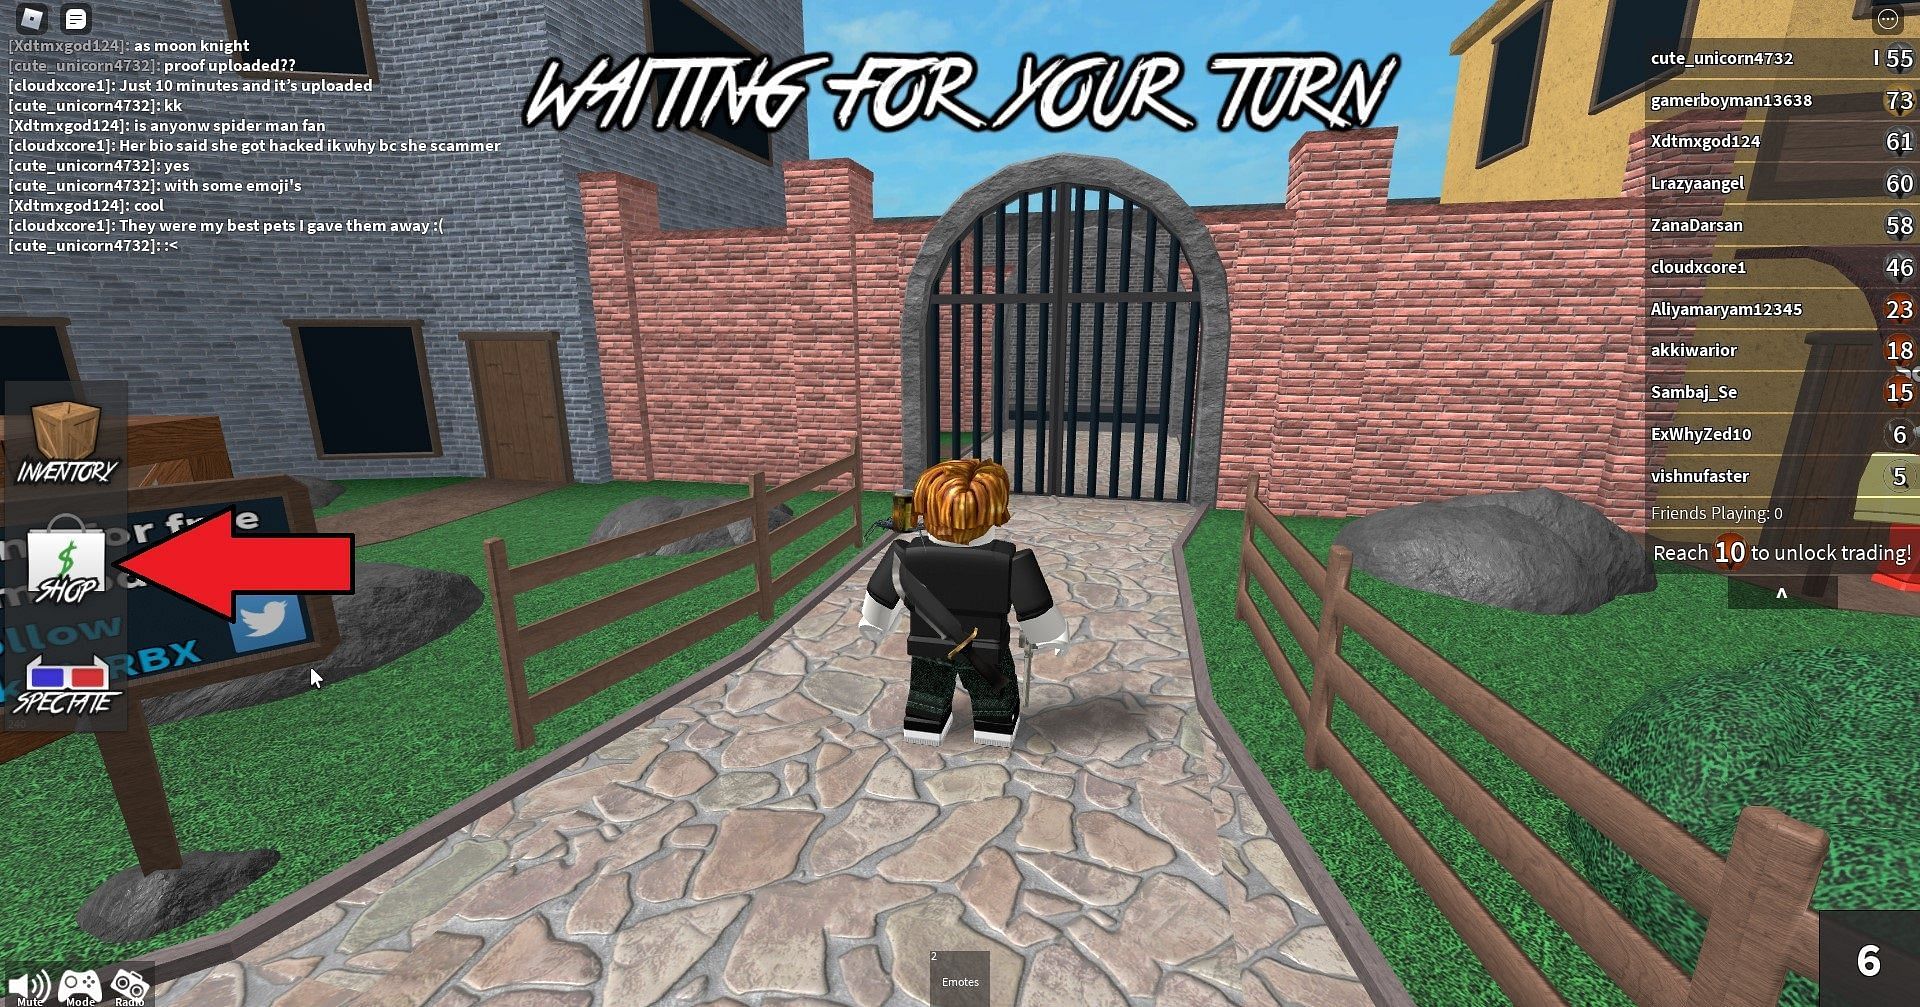 Users will first have to head over to the in-game store (Image via Murder Mystery 2 / Roblox)